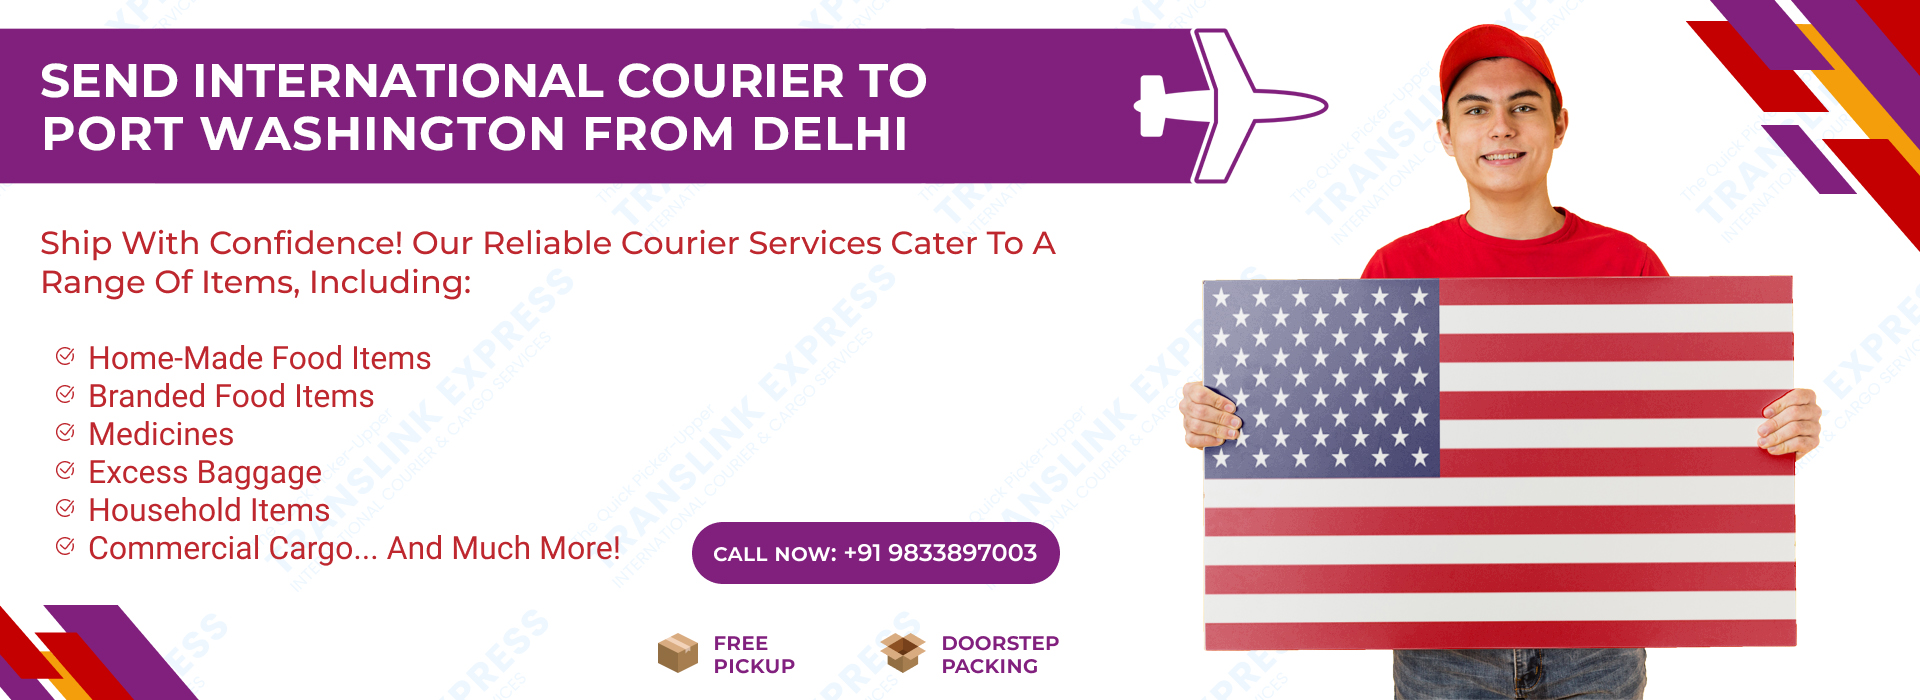 Courier to Port Washington From Delhi